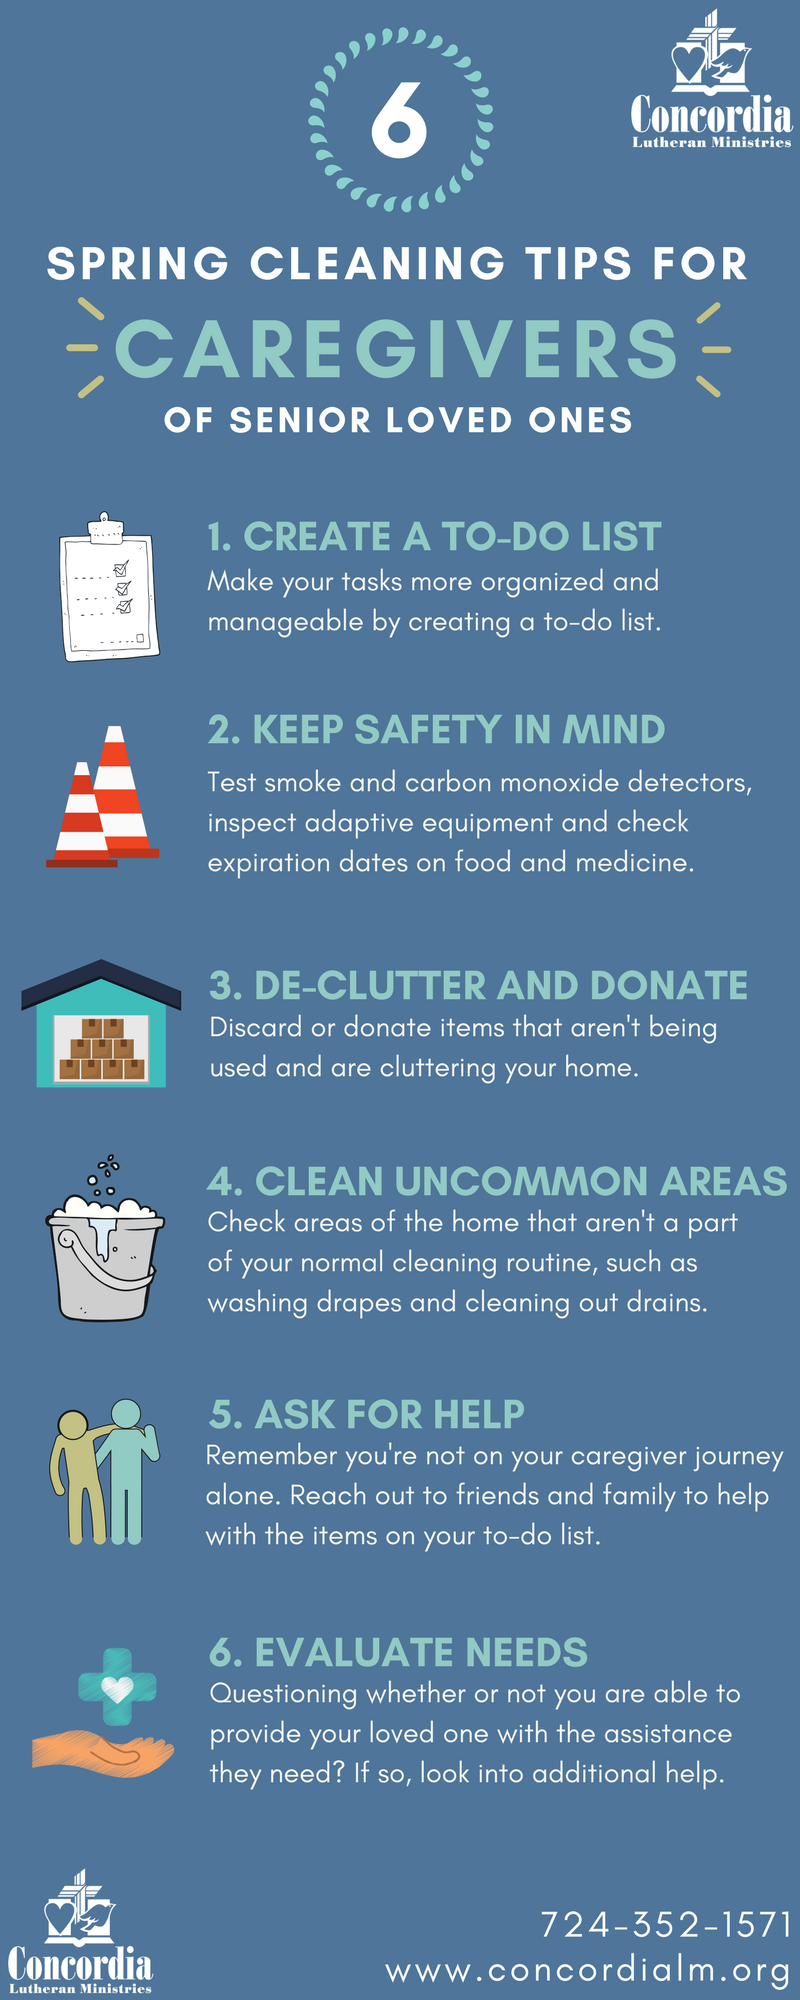 Spring Cleaning for Caregivers